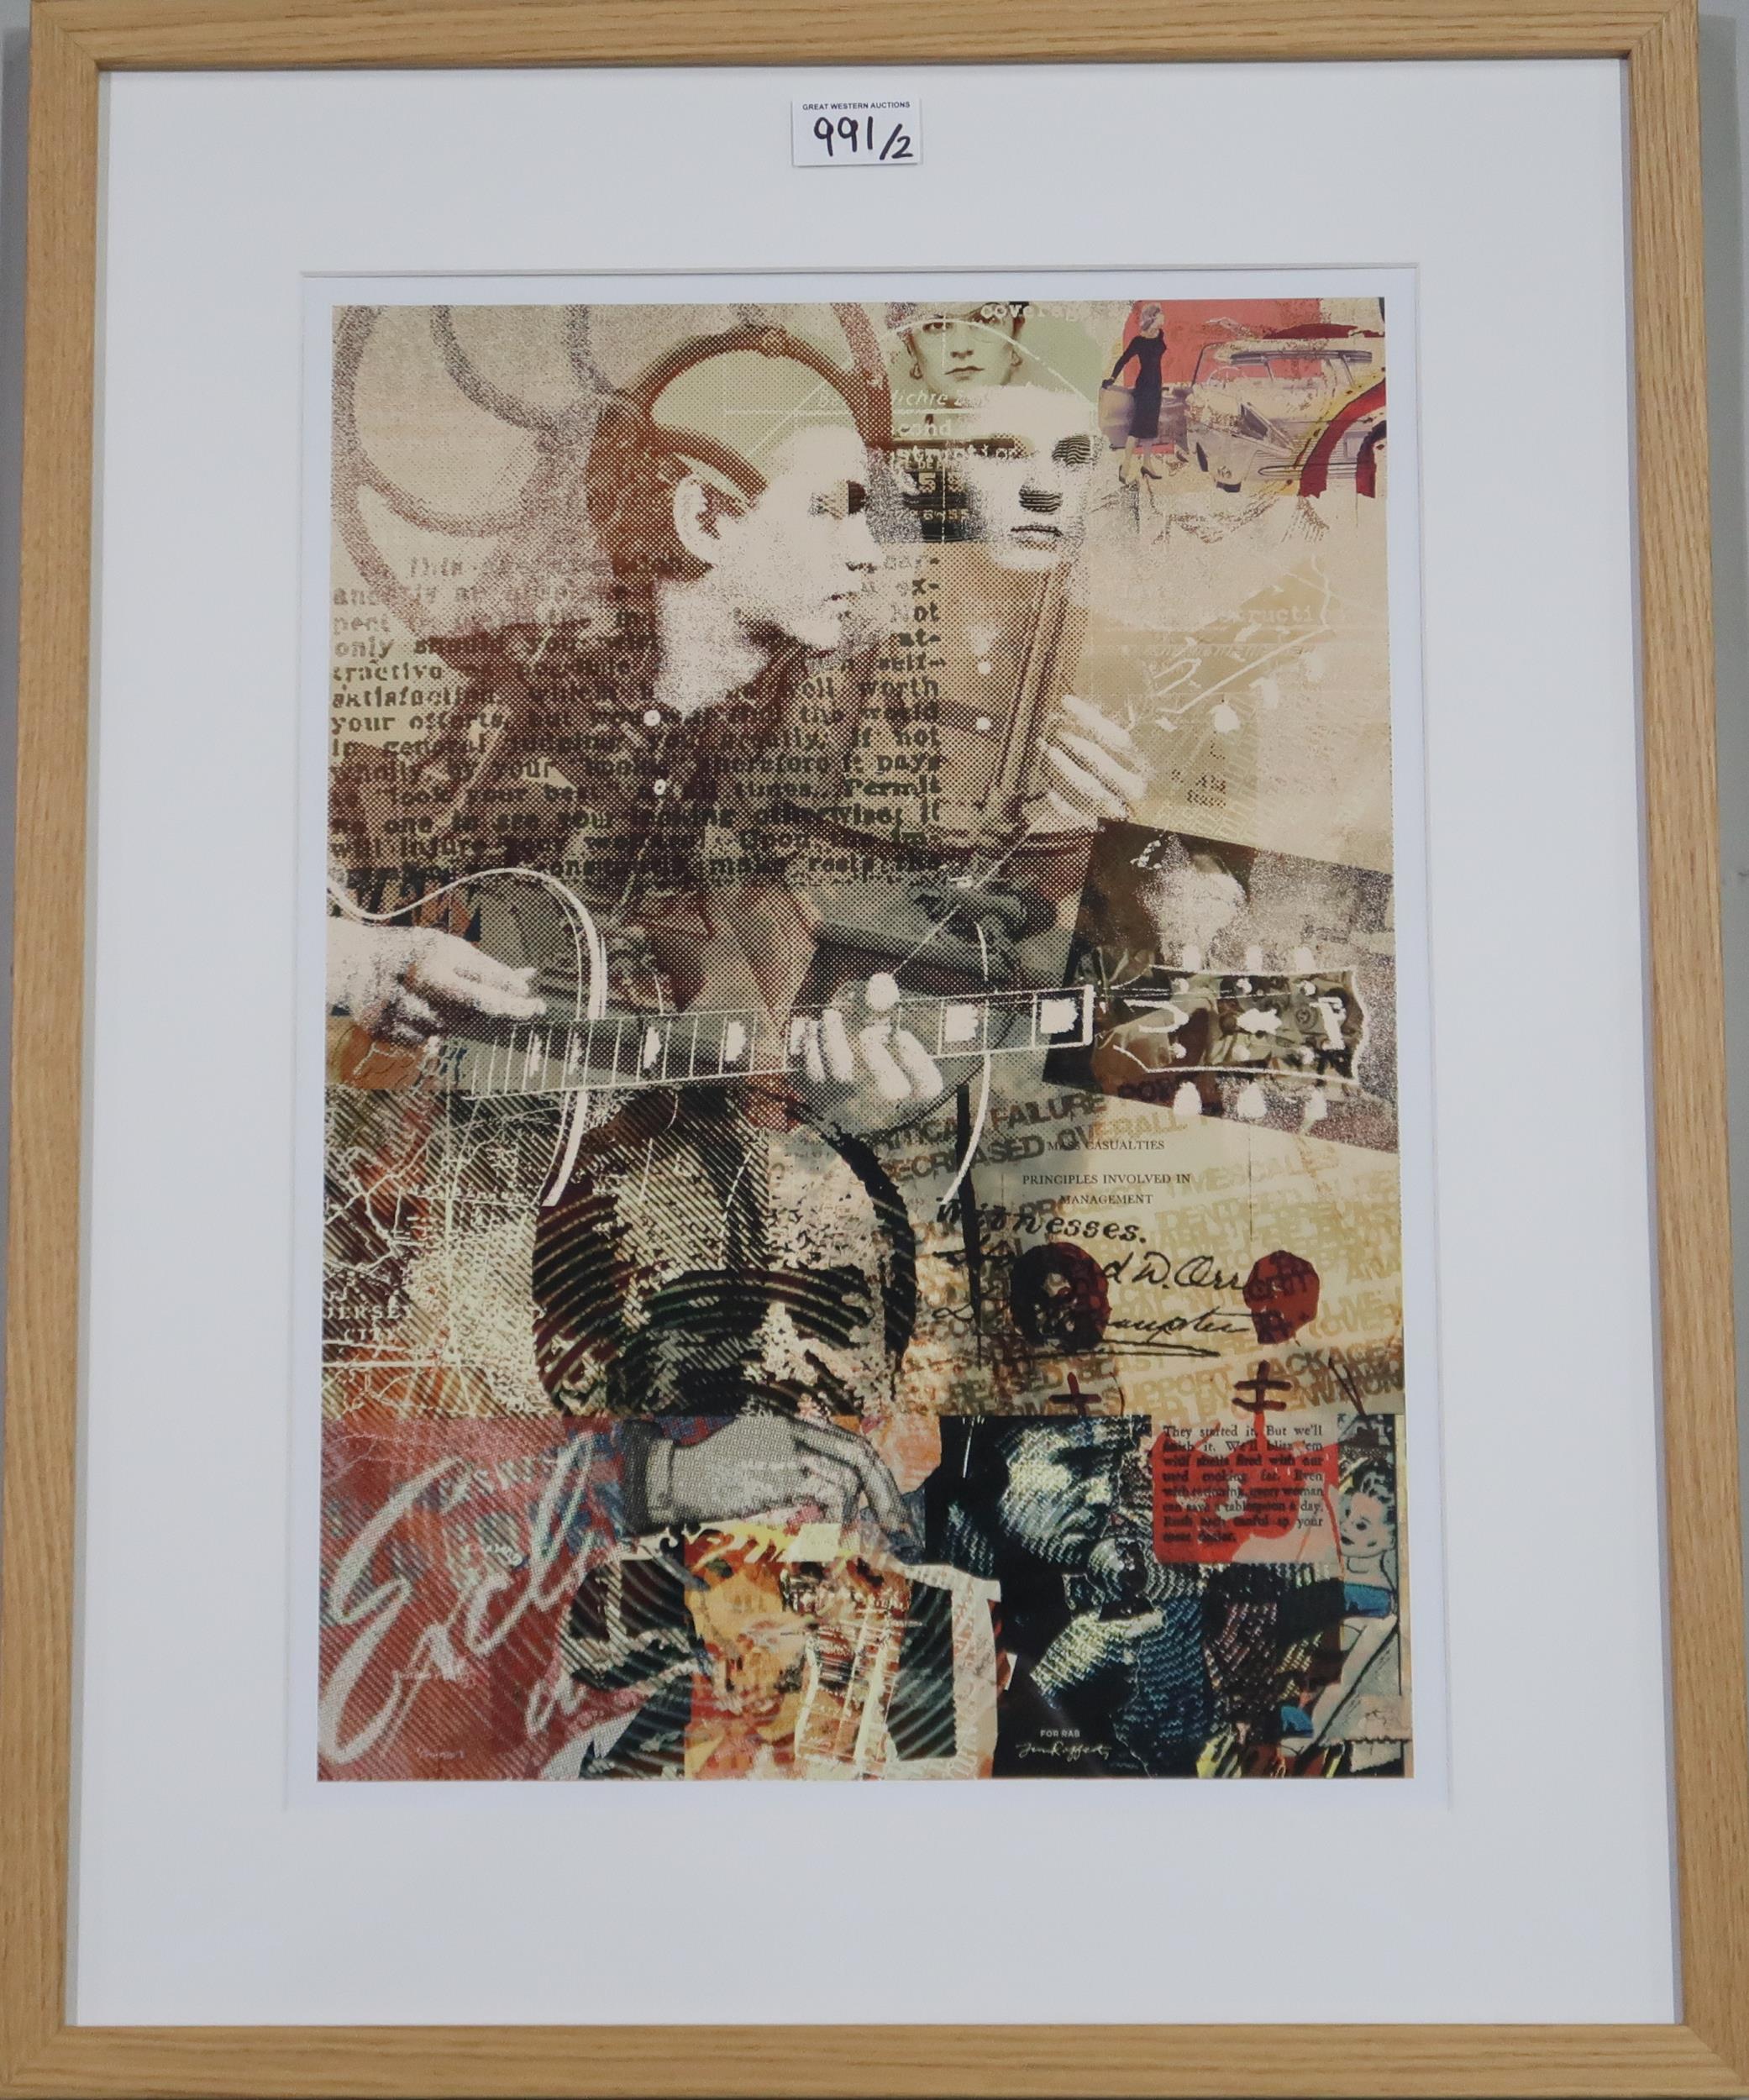 JIM RAFFERTY (CONTEMPORARY SCHOOL)  LONNIE DONEGAN  Print multiple, 46 x 34cm  Together with a - Image 3 of 3